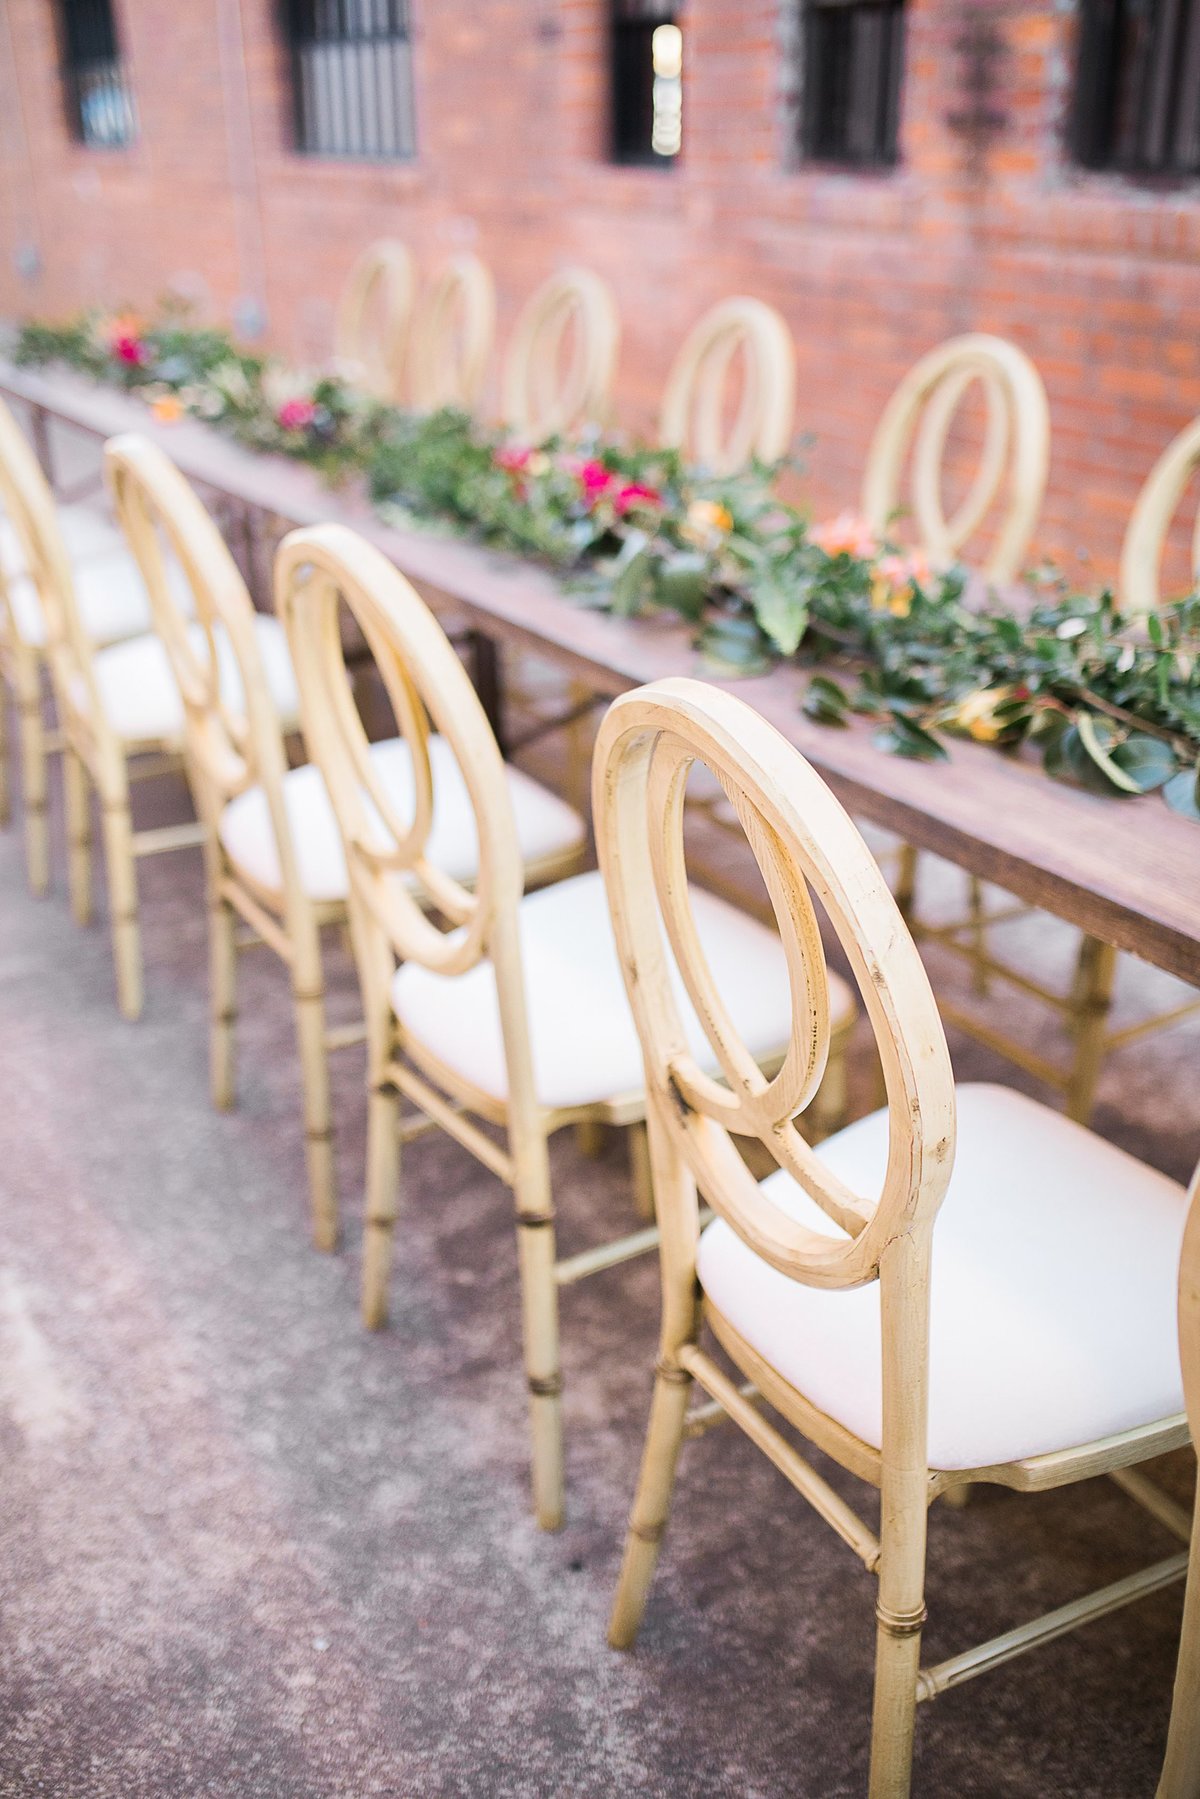 Wedding Photographer, detail shot of chairs at the reception